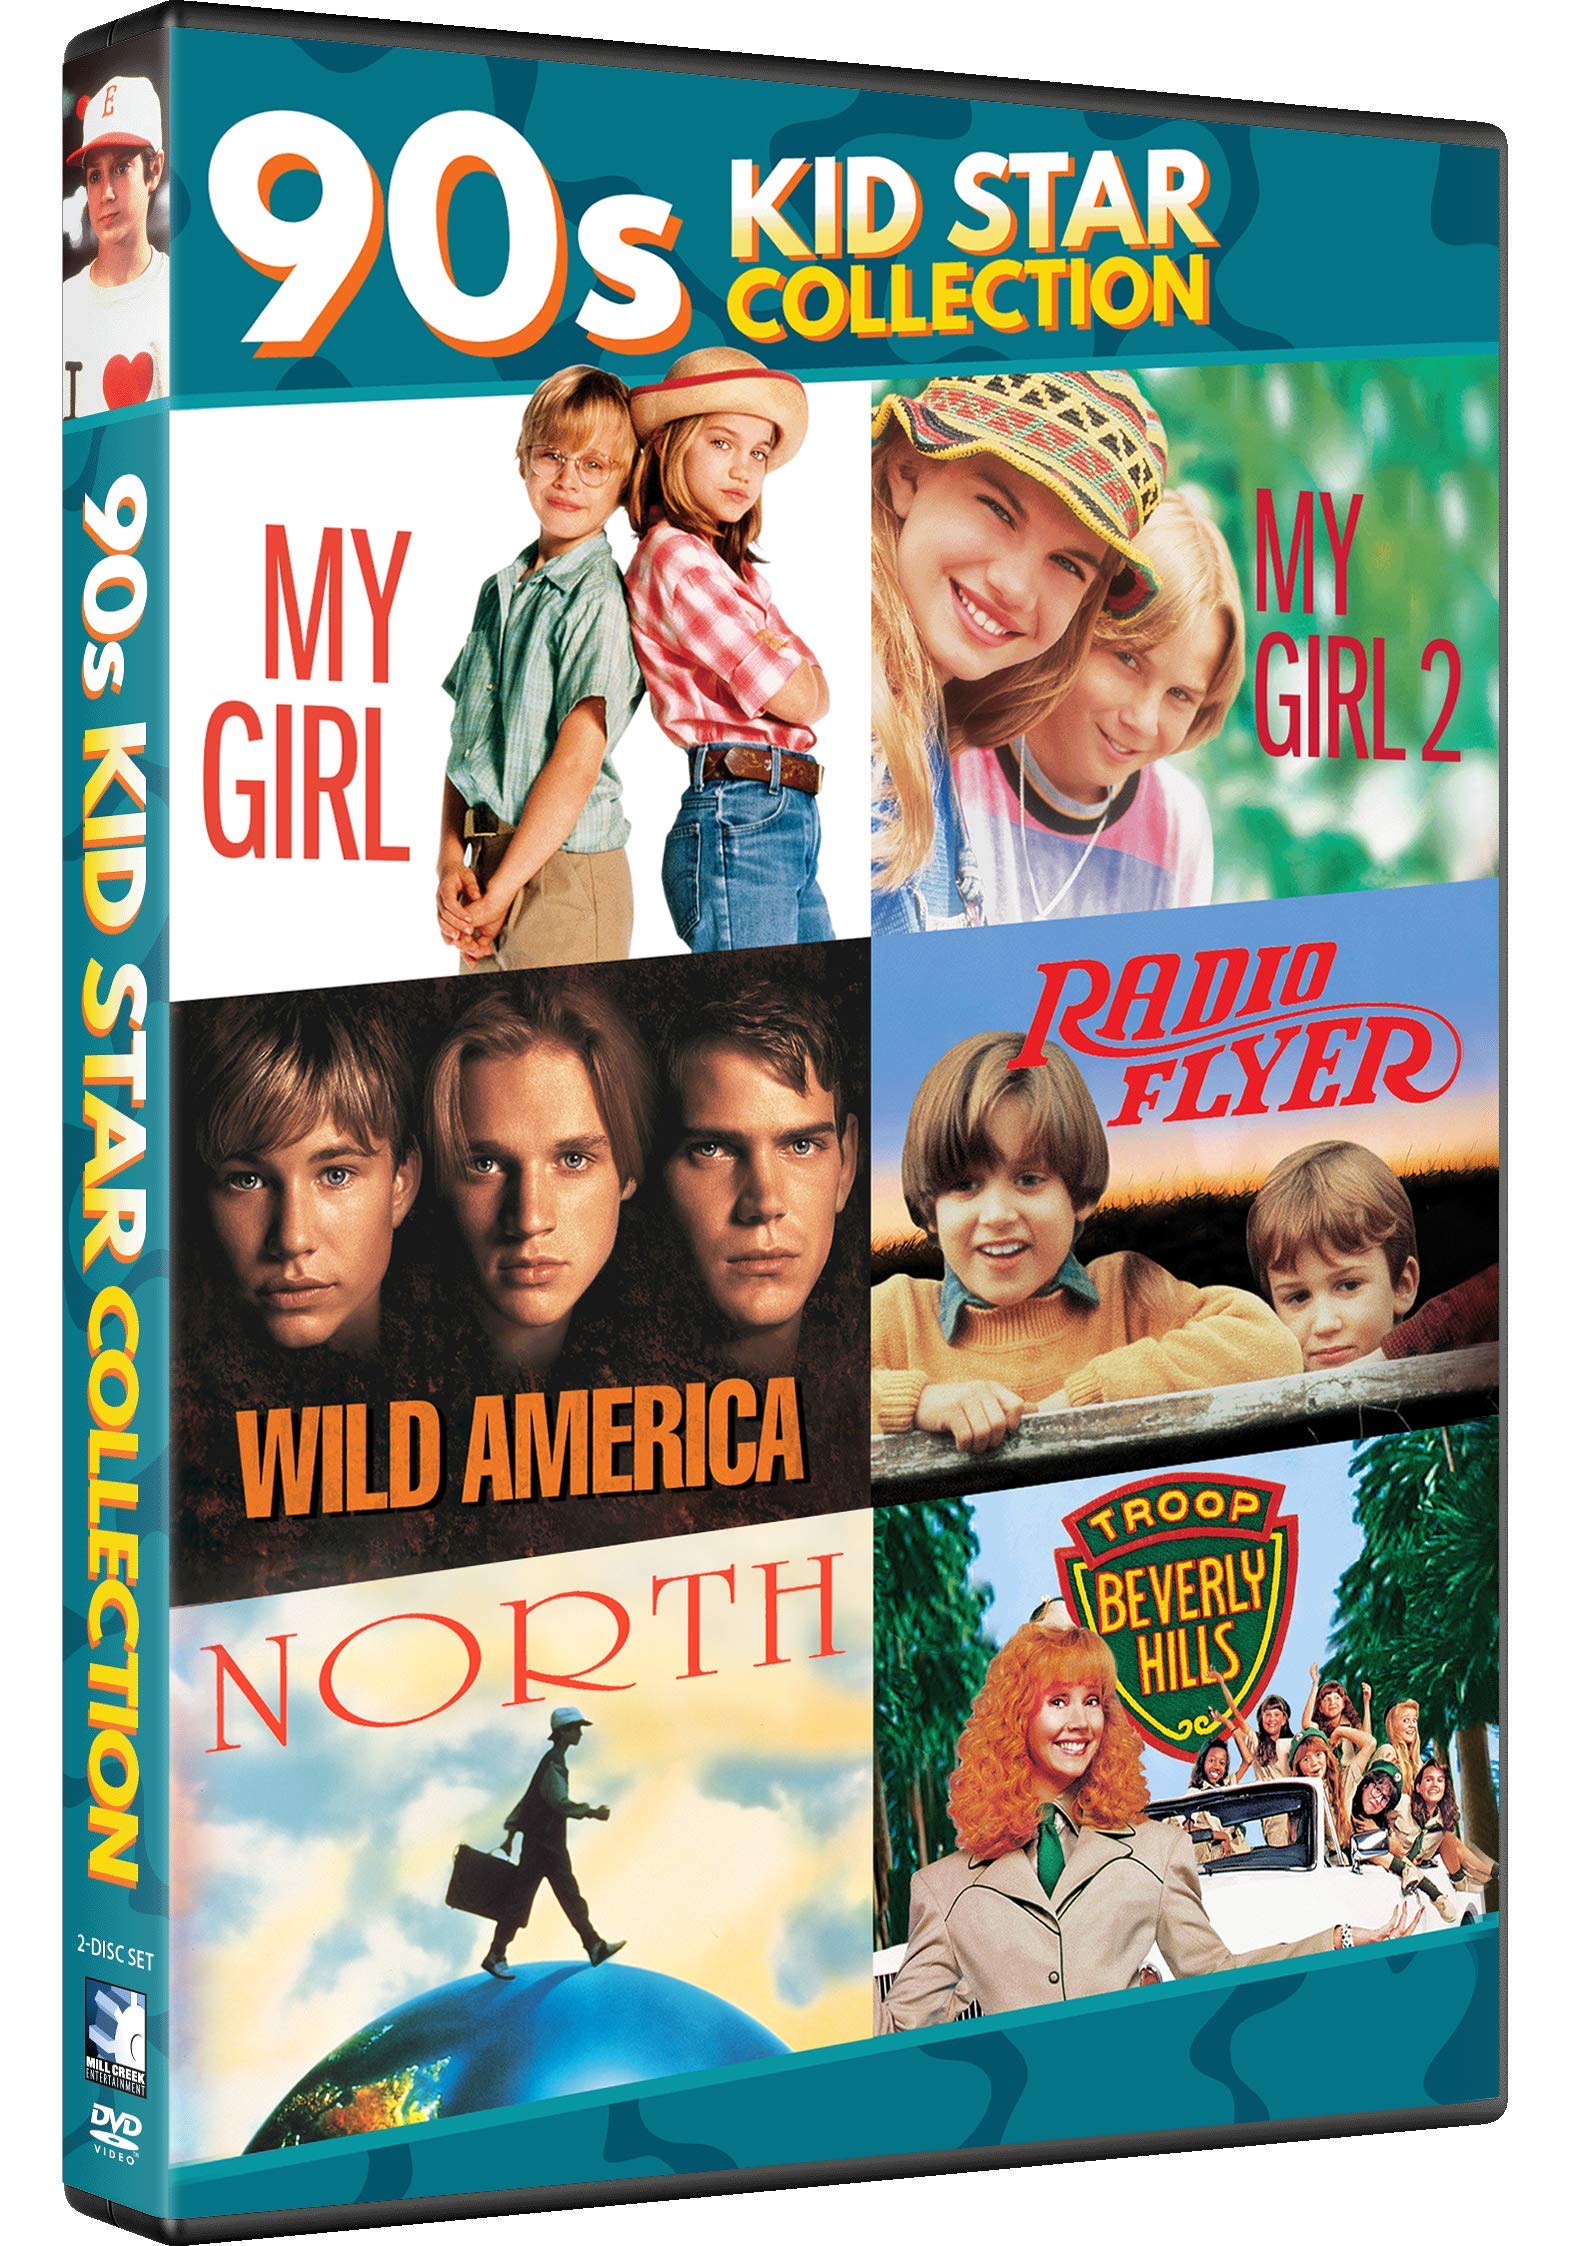 90s Kid Star Collection on MovieShack